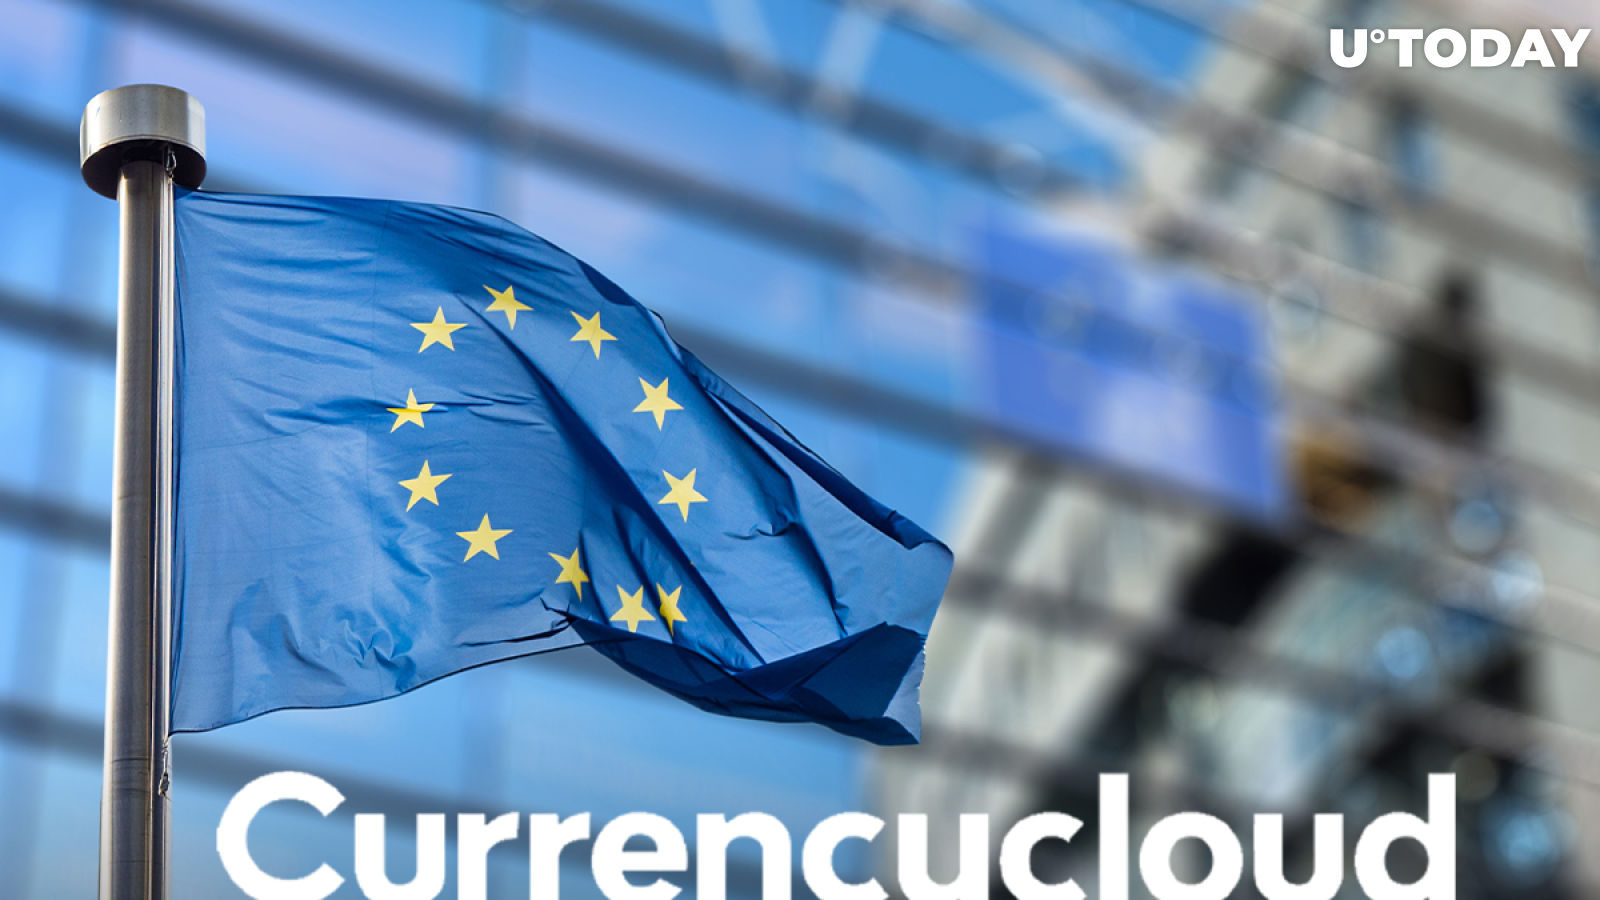 Ripple’s New Partner Currencycloud Granted License to Keep Operating Across EU After Brexit Negotiations